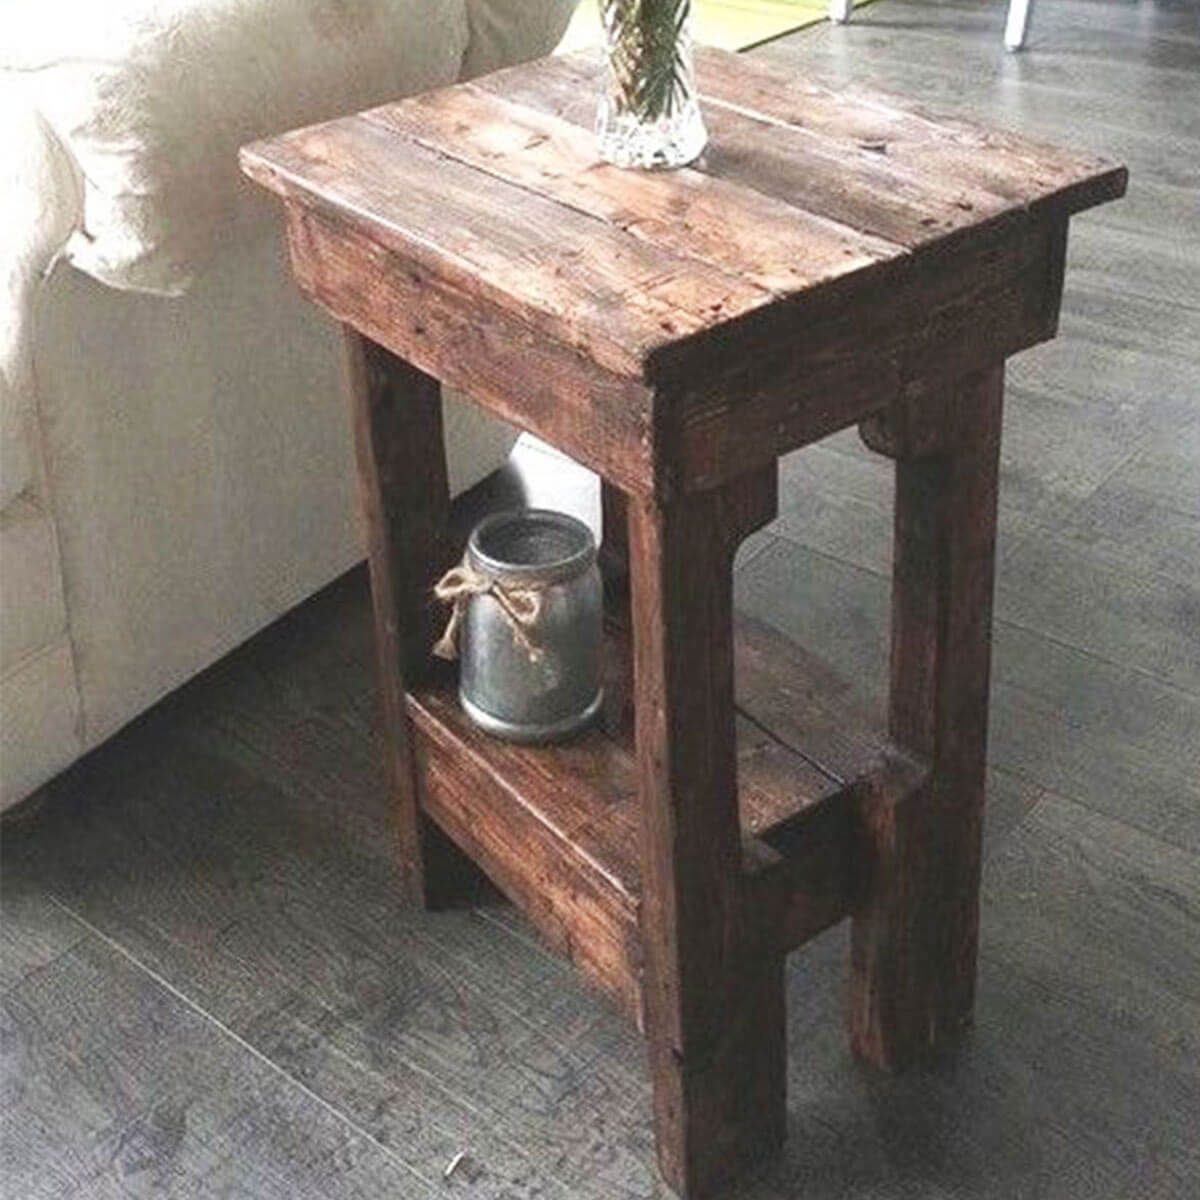 incredible diy end tables simple table ideas the family pallet rustic affordable cherry wood accent small dog pet cage modern breakfast contemporary office furniture ethan allen